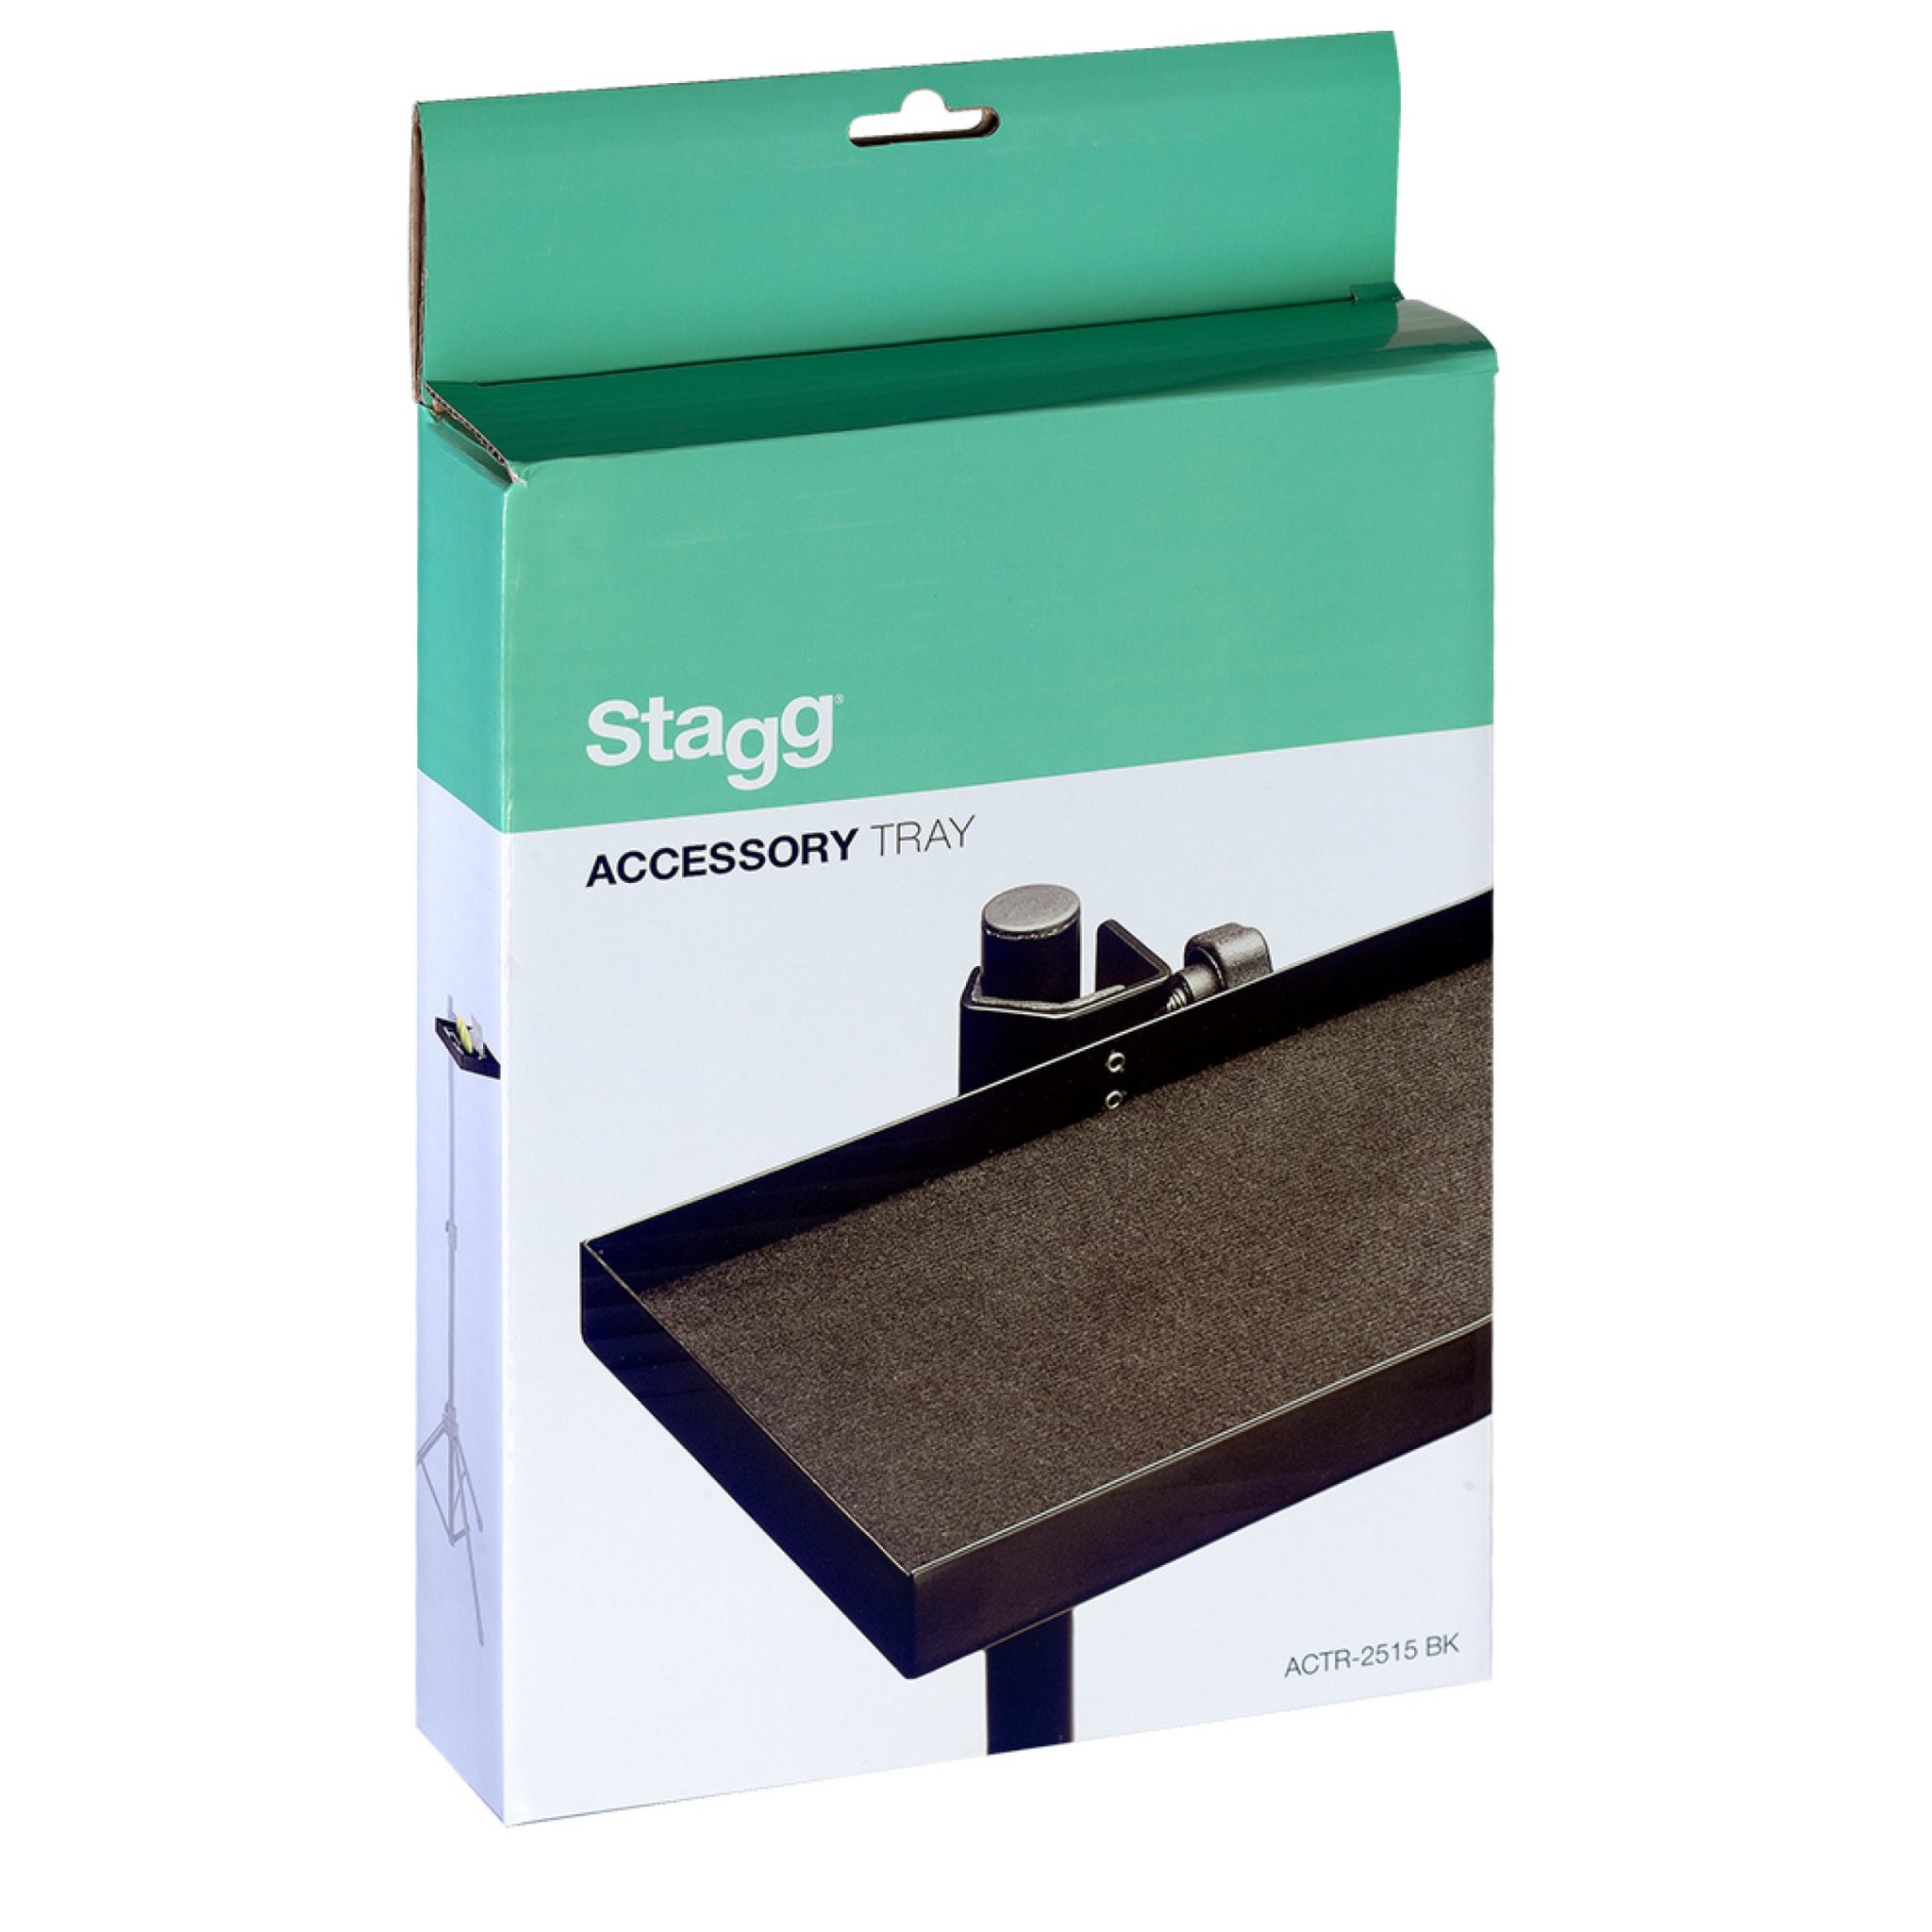 Stagg ACTR-2515BK Accessory Tray 4